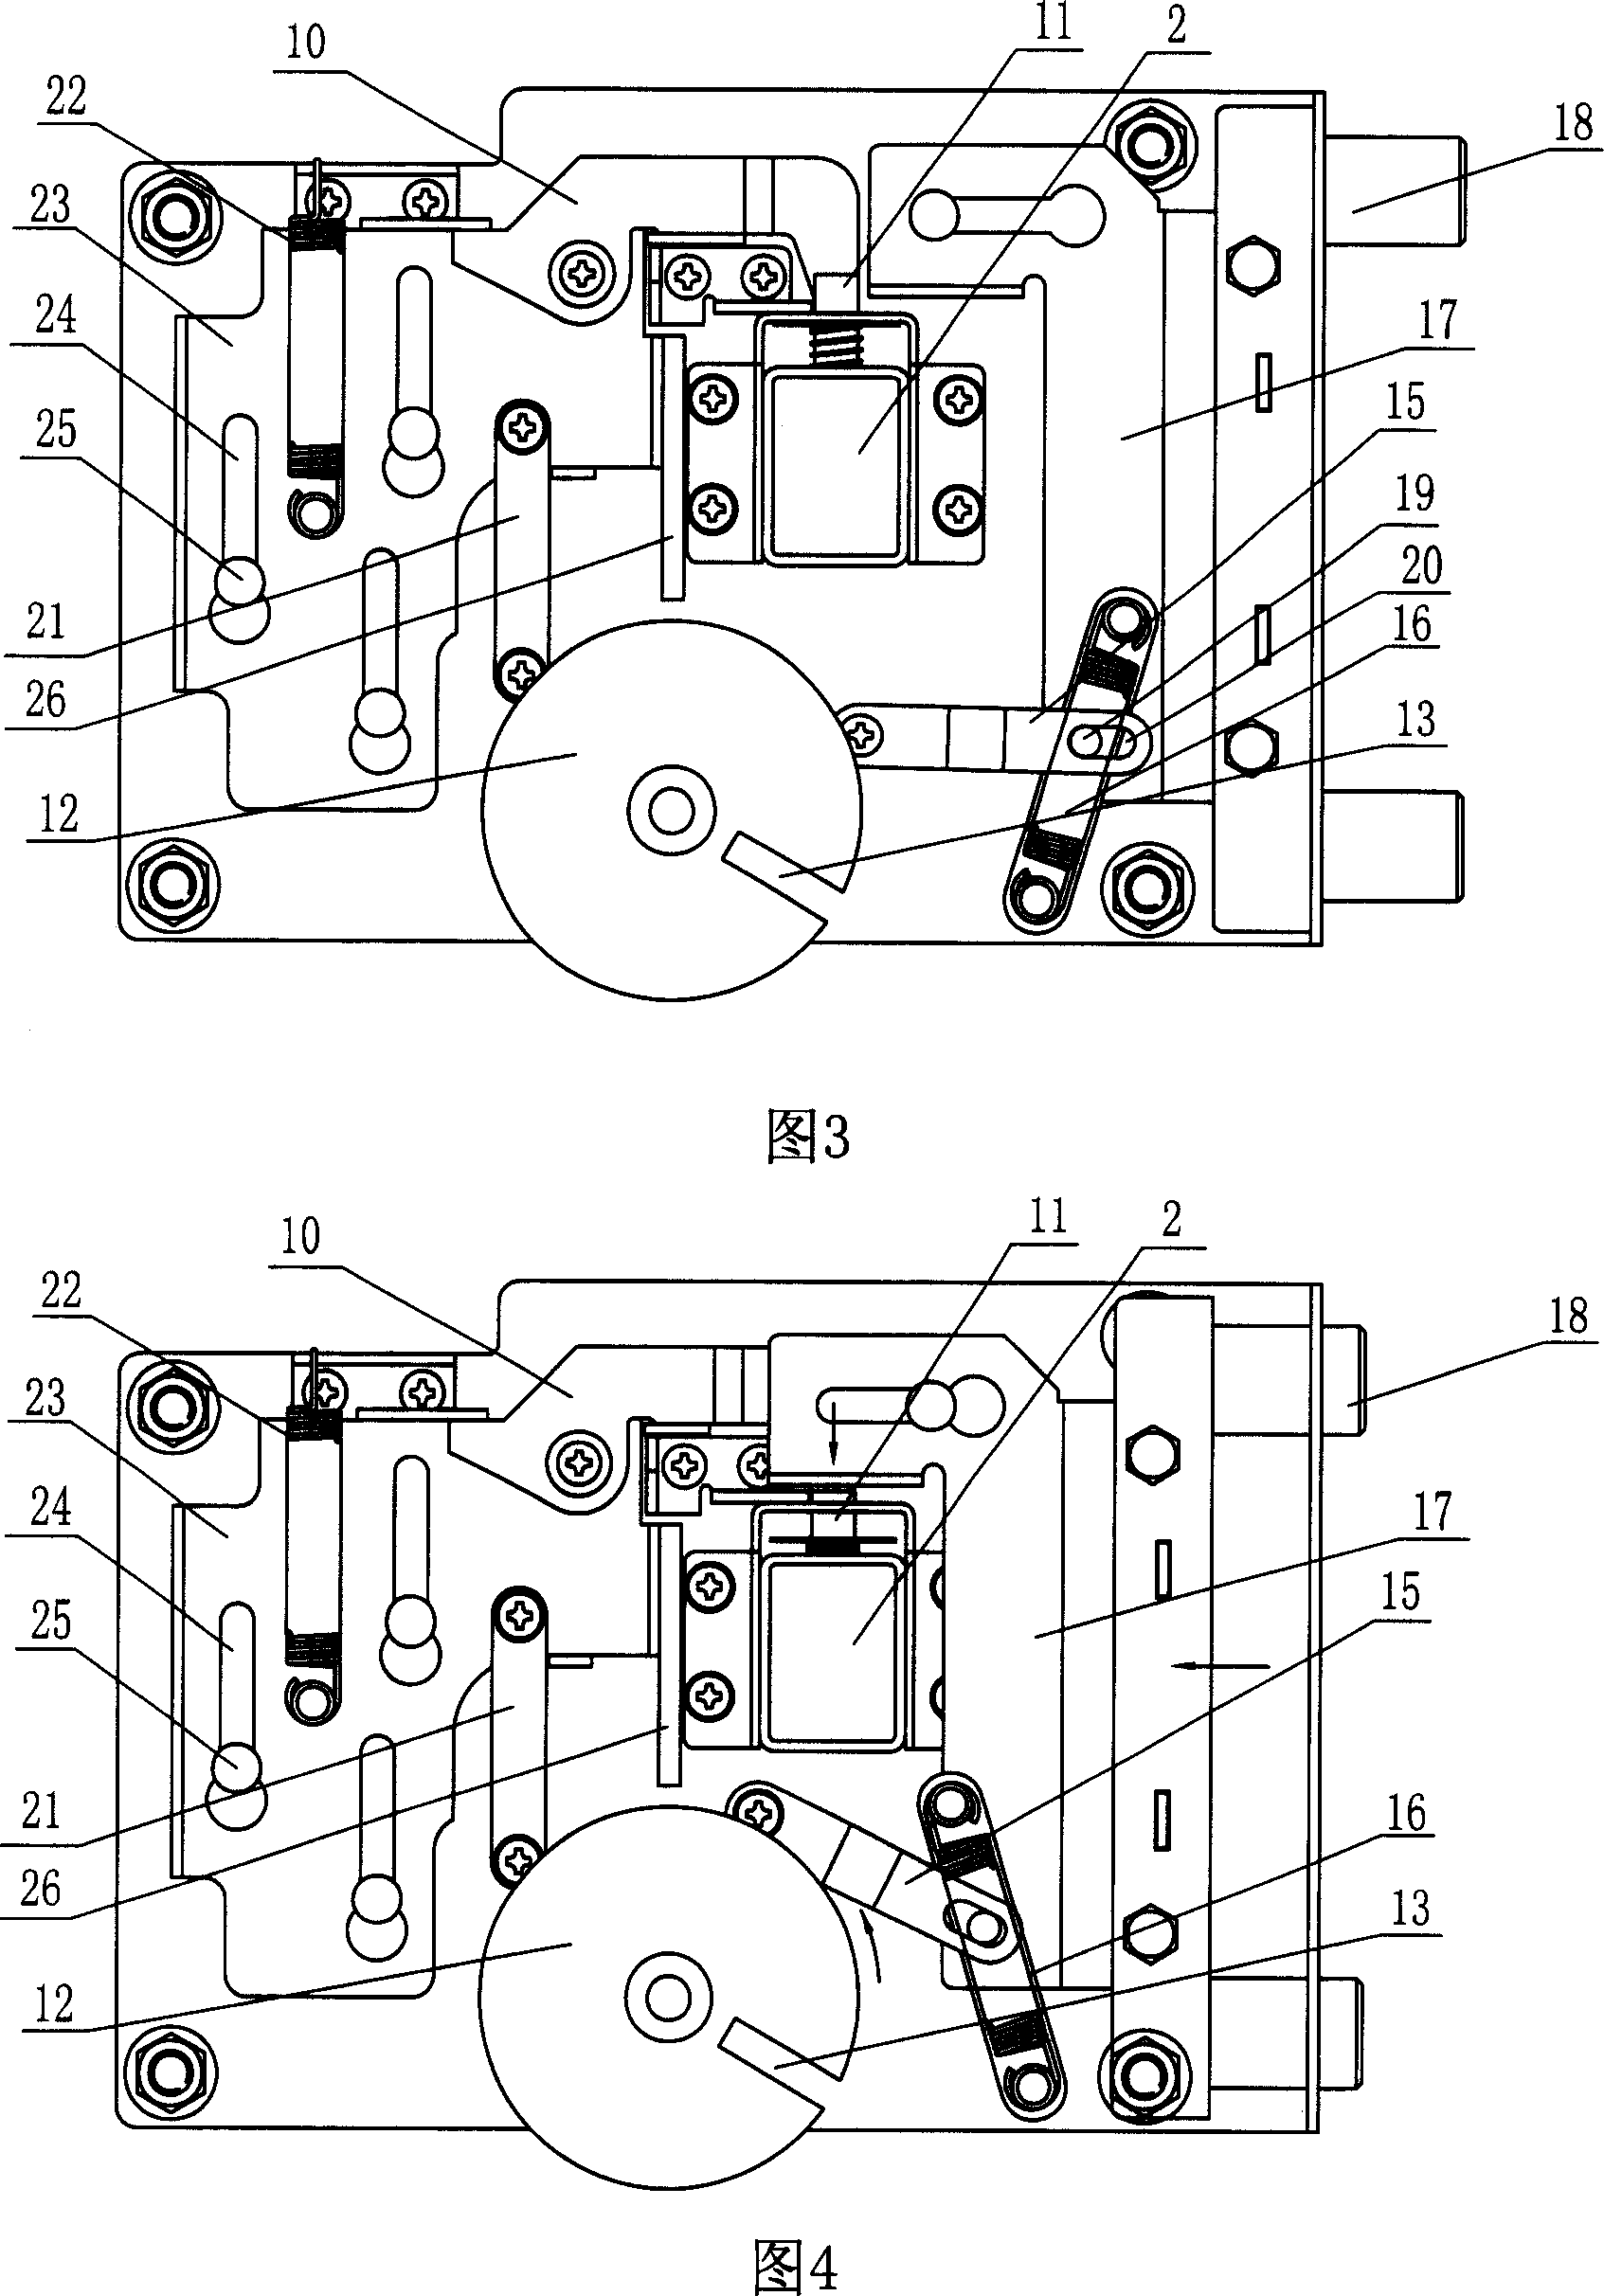 Composition type lock in use for safe deposit box